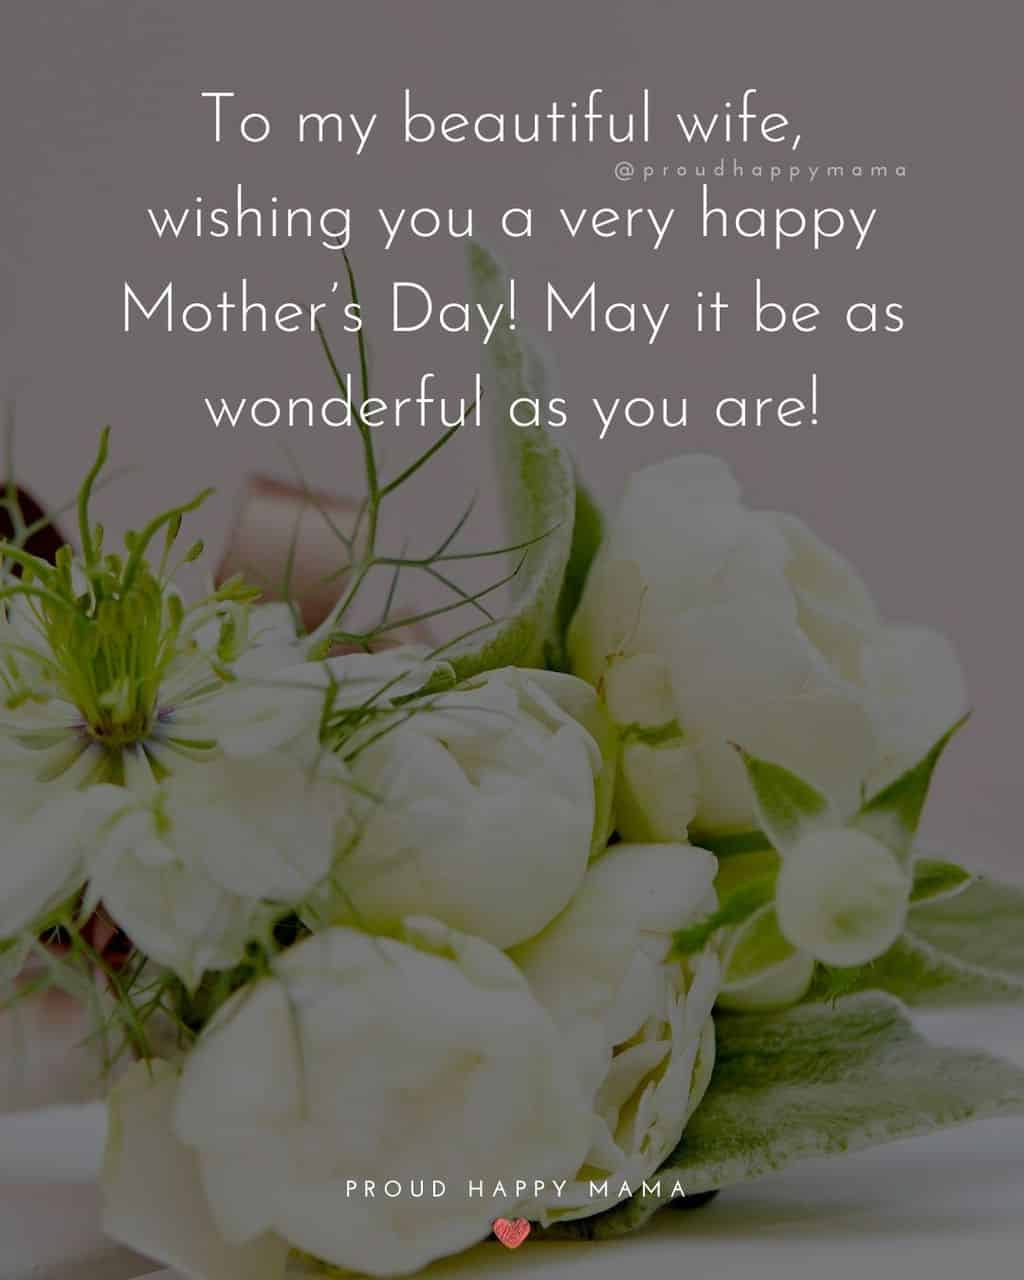 Happy Mothers Day Quotes For Wife - To my beautiful wife, wishing you a very happy Mother’s Day! May it be as wonderful